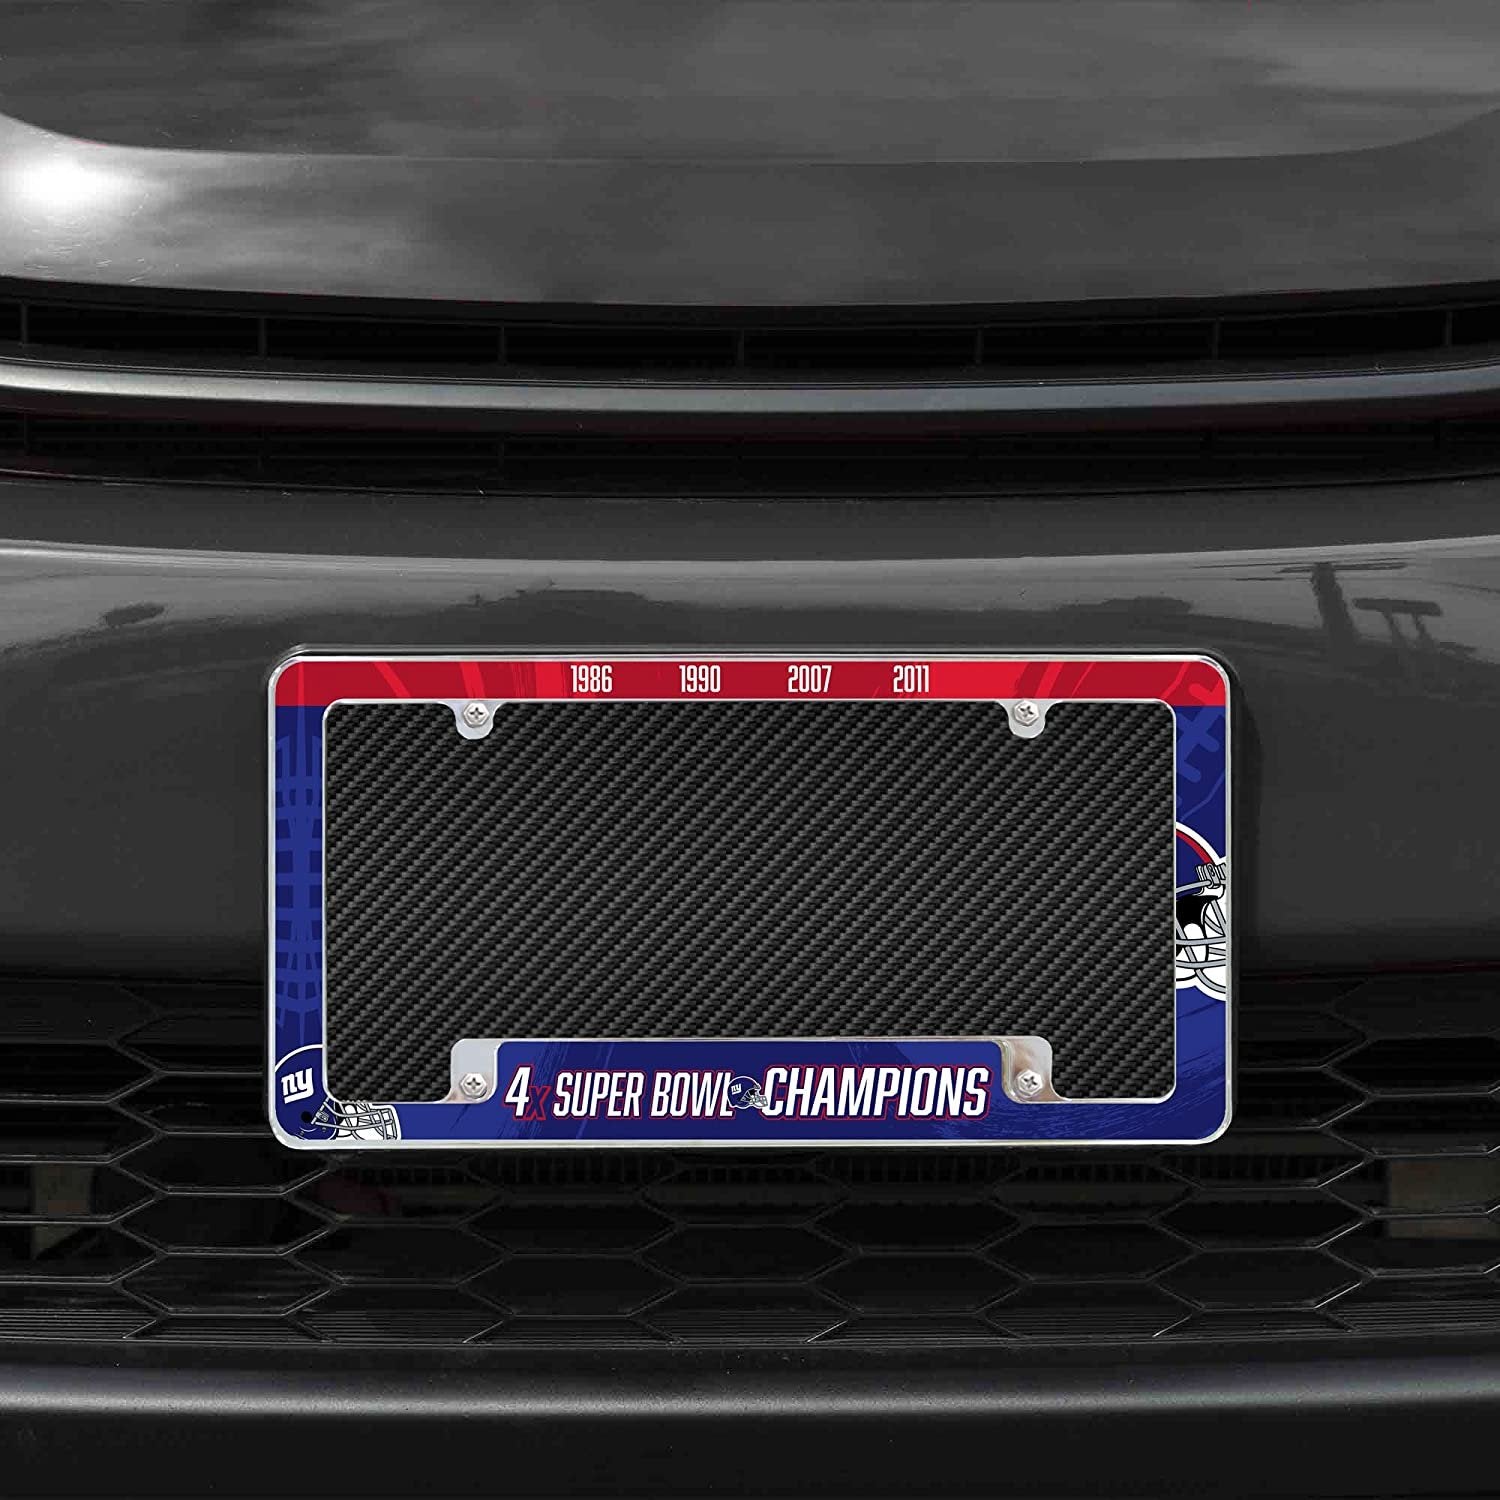 New York Giants Metal License Plate Frame Tag Cover 4 Time Champions Design 12x6 Inch